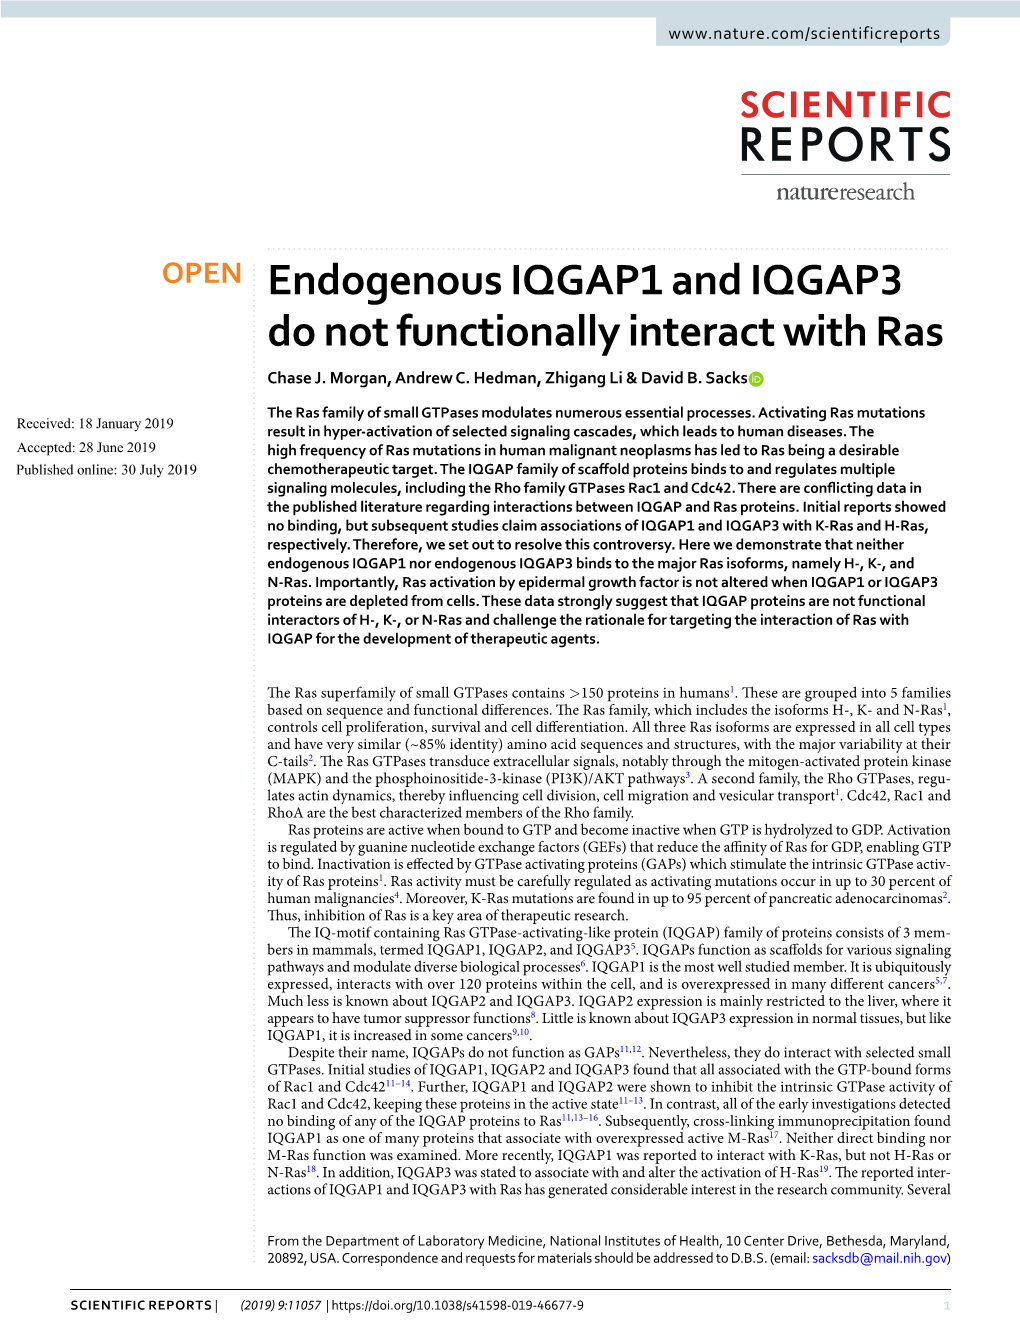 Endogenous IQGAP1 and IQGAP3 Do Not Functionally Interact with Ras Chase J